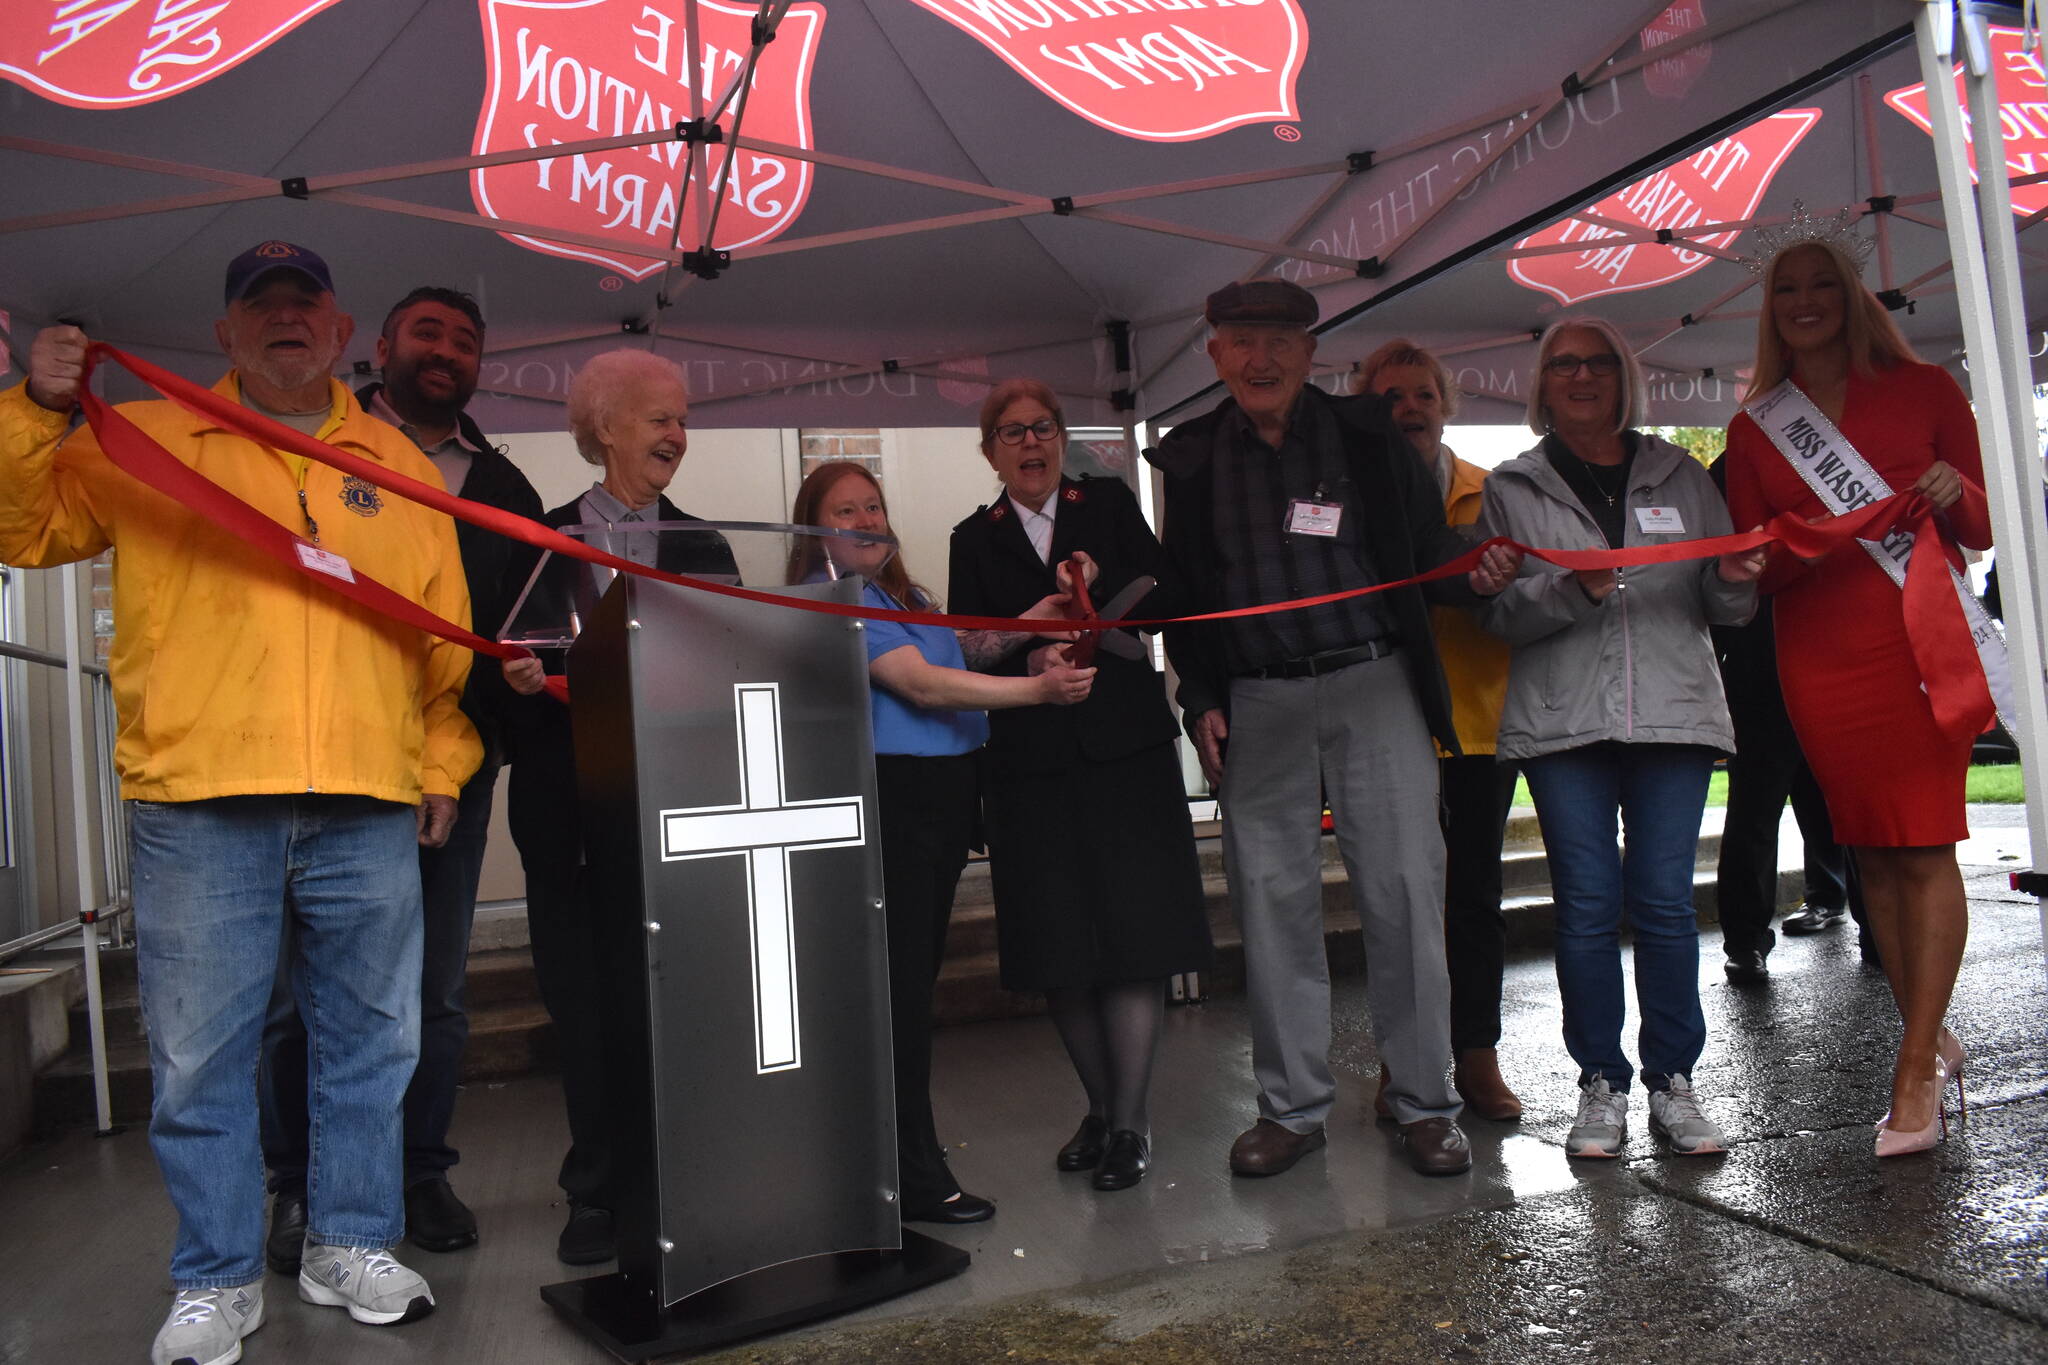 Clayton Franke / The Daily World
Representatives of the Salvation Army, Aberdeen Lions Club, and other community partners celebrate the opening of the Salvation Army’s new client-choice food bank on the corner of G and 2nd Streets in Aberdeen at a ceremony on Monday, Nov. 6.